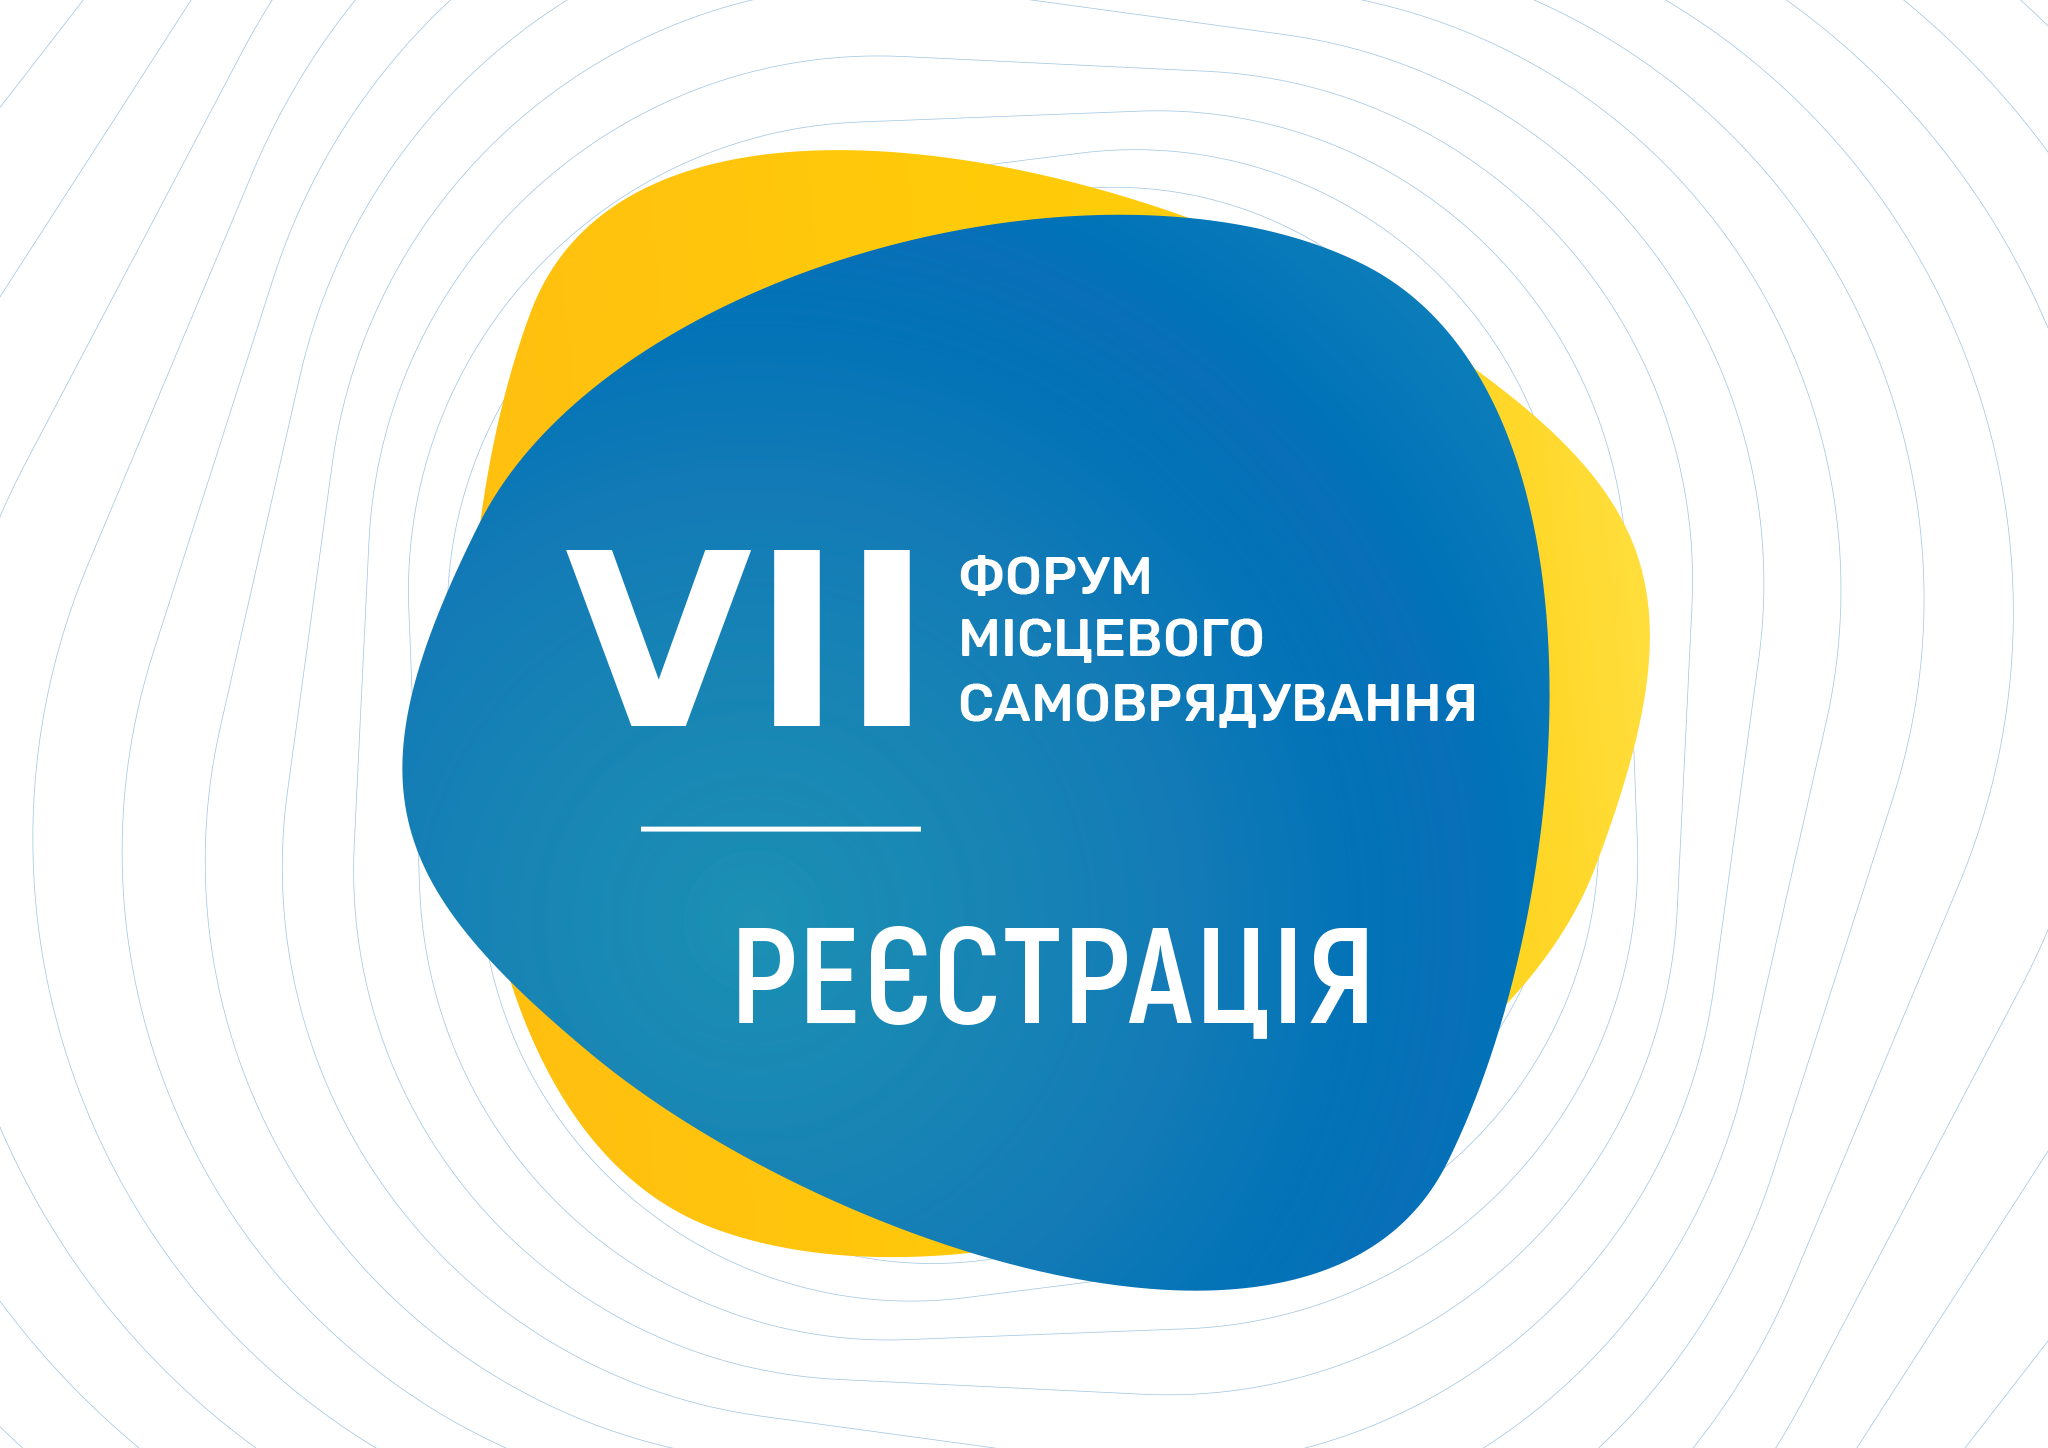 7th Local Self-Government Forum in Lviv to be held on 15 March (registration)